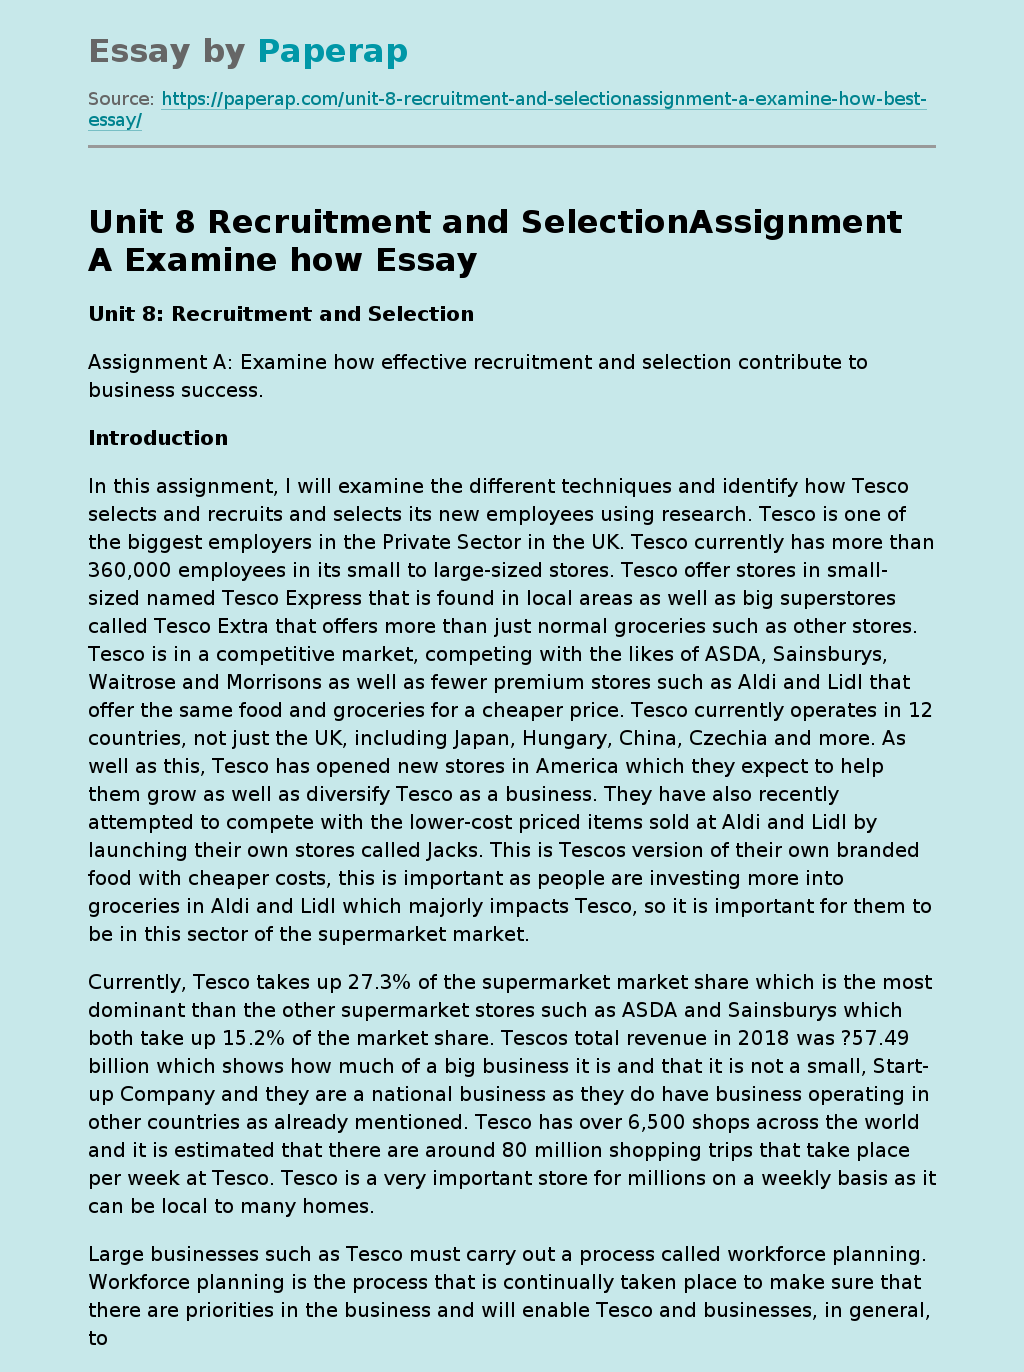 Unit 8 Recruitment and SelectionAssignment A Examine how